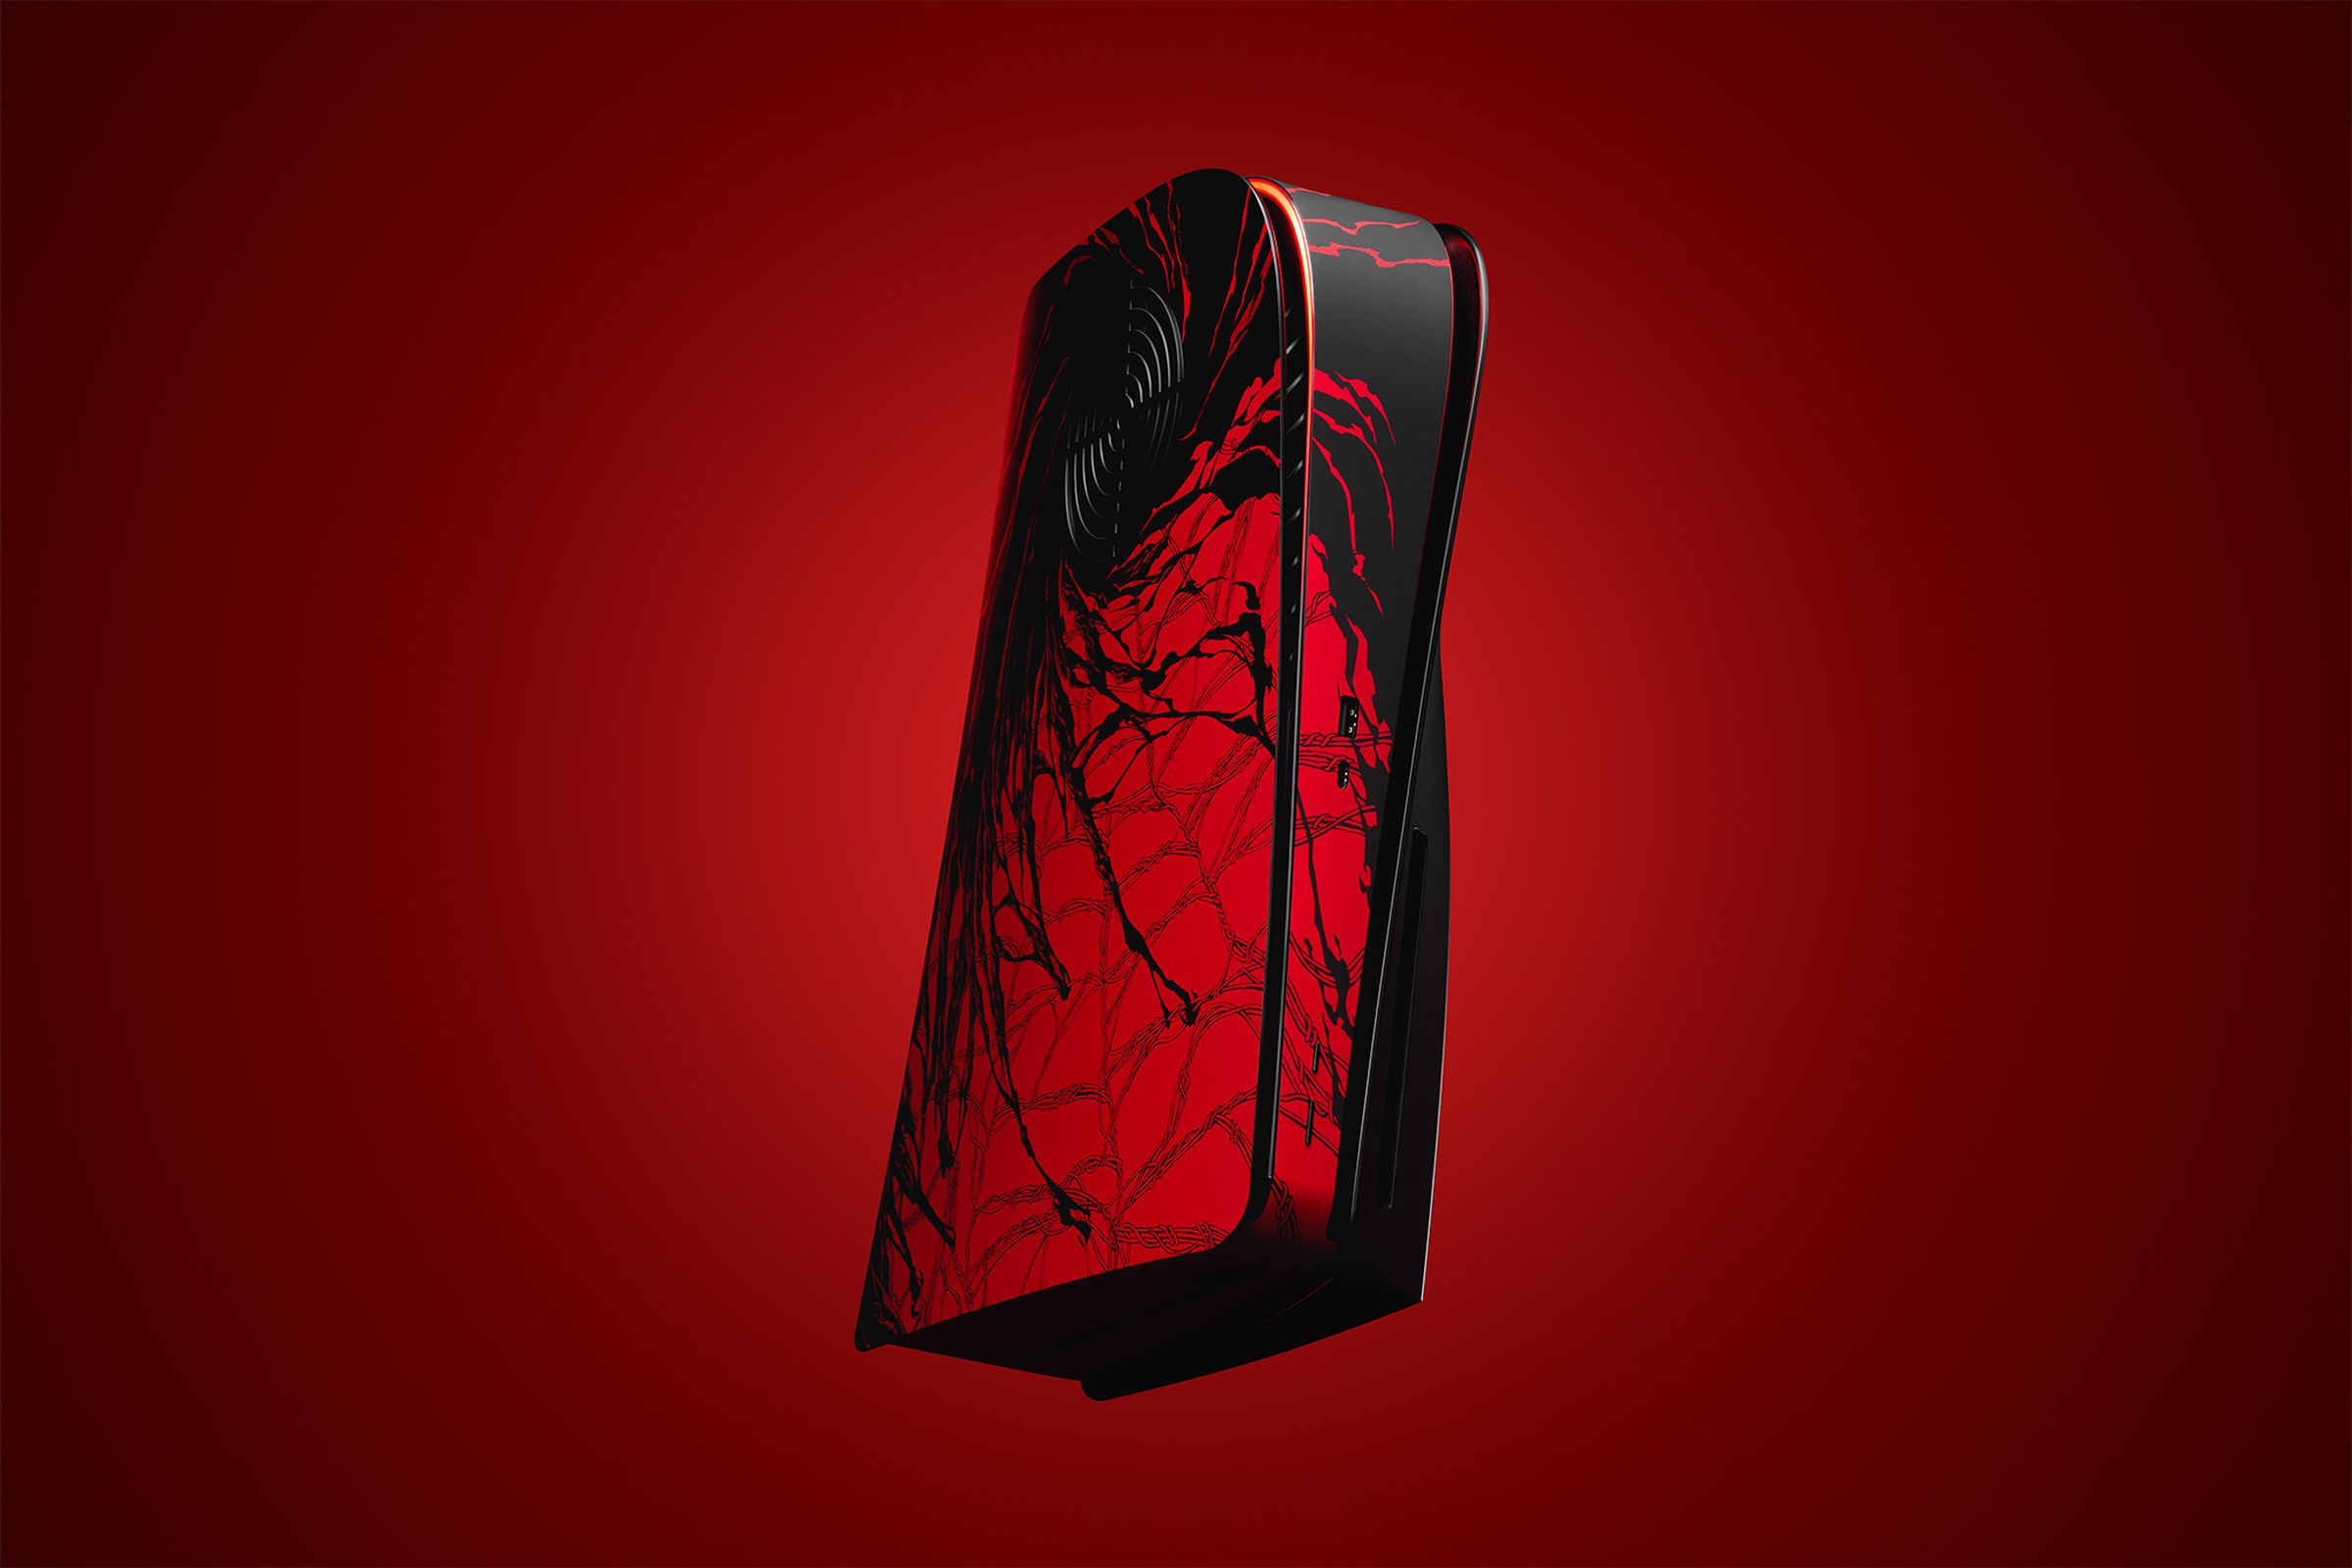 A black and red PS5 with creeping webs and dark matter.